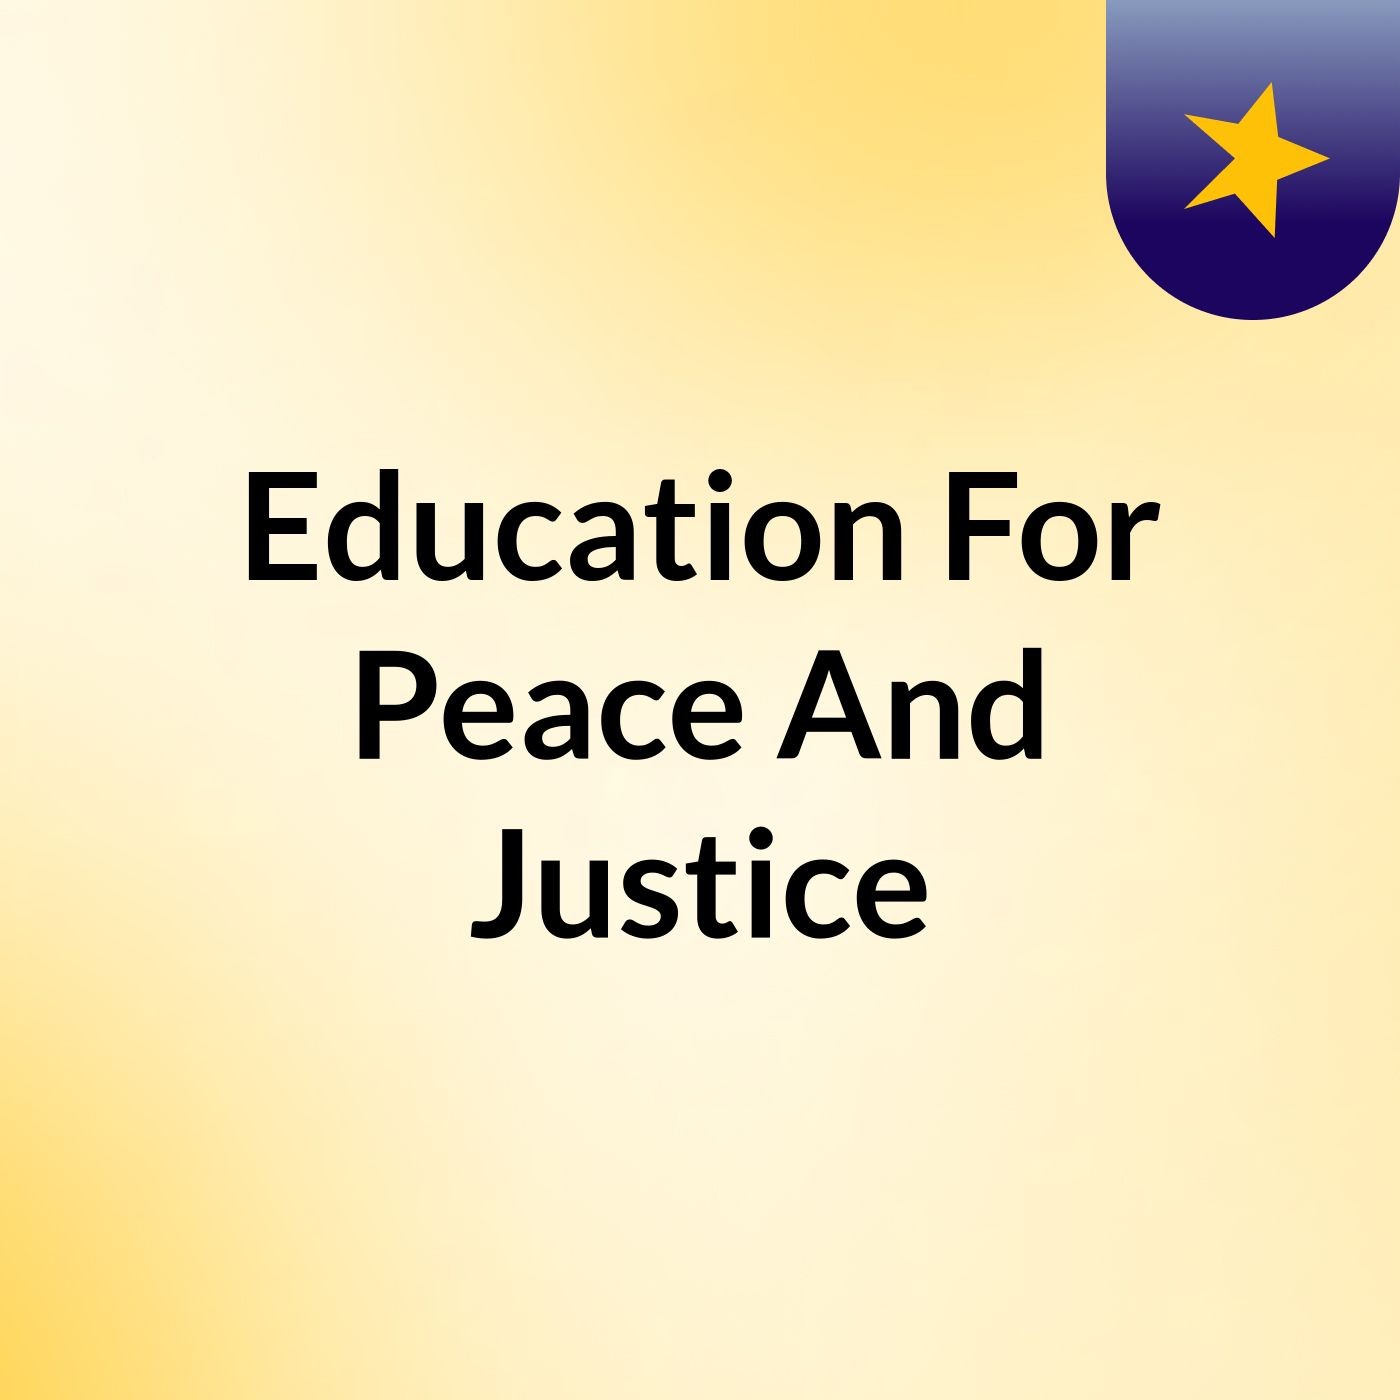 Education For Peace And Justice